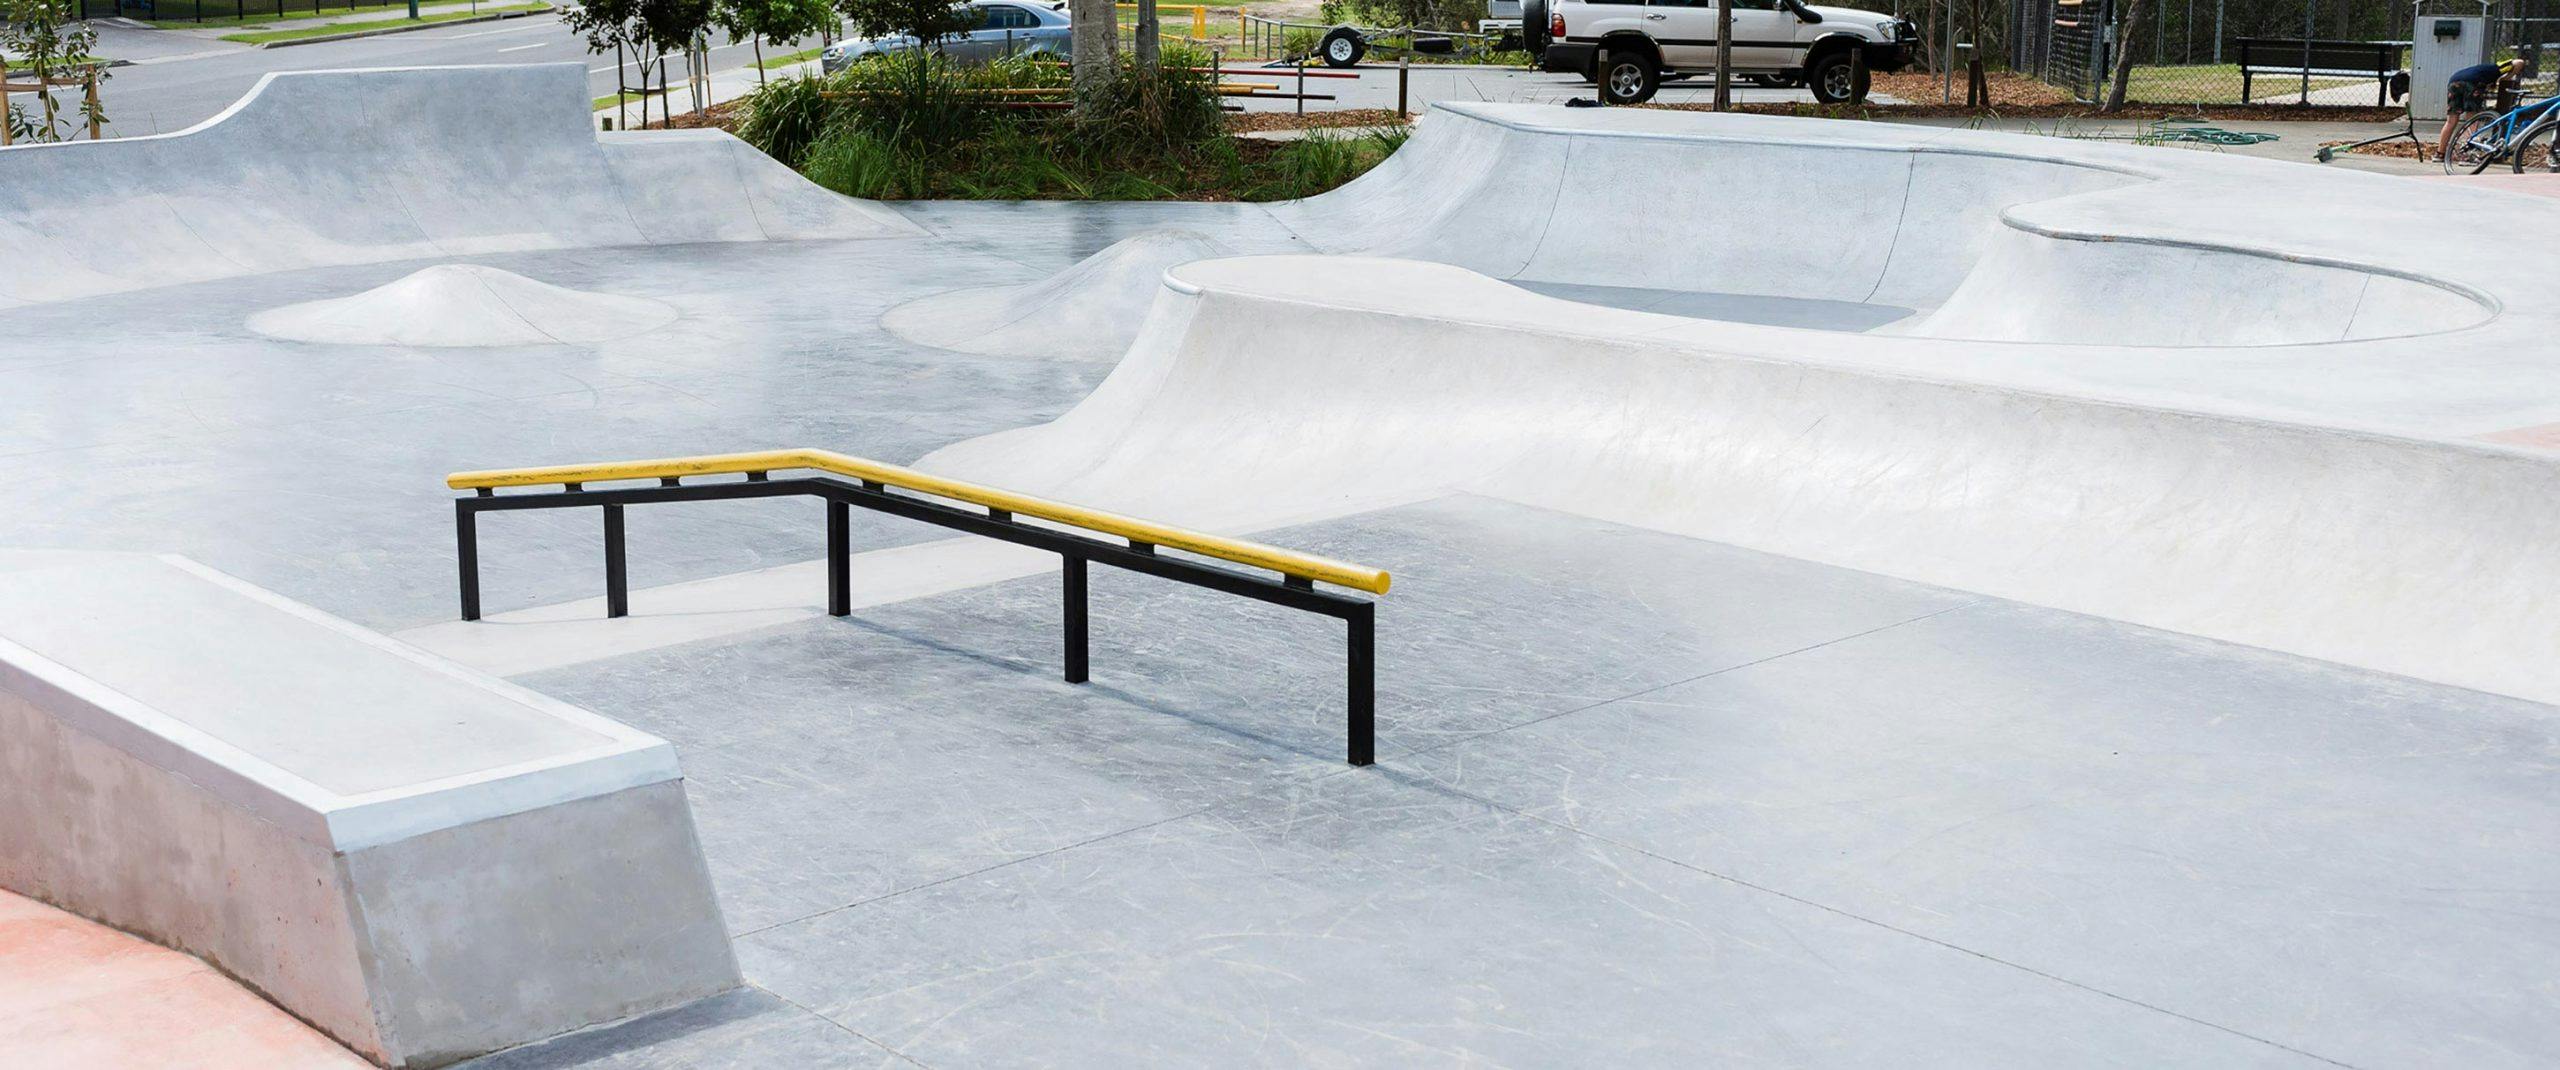 Example of proposed skateable elements